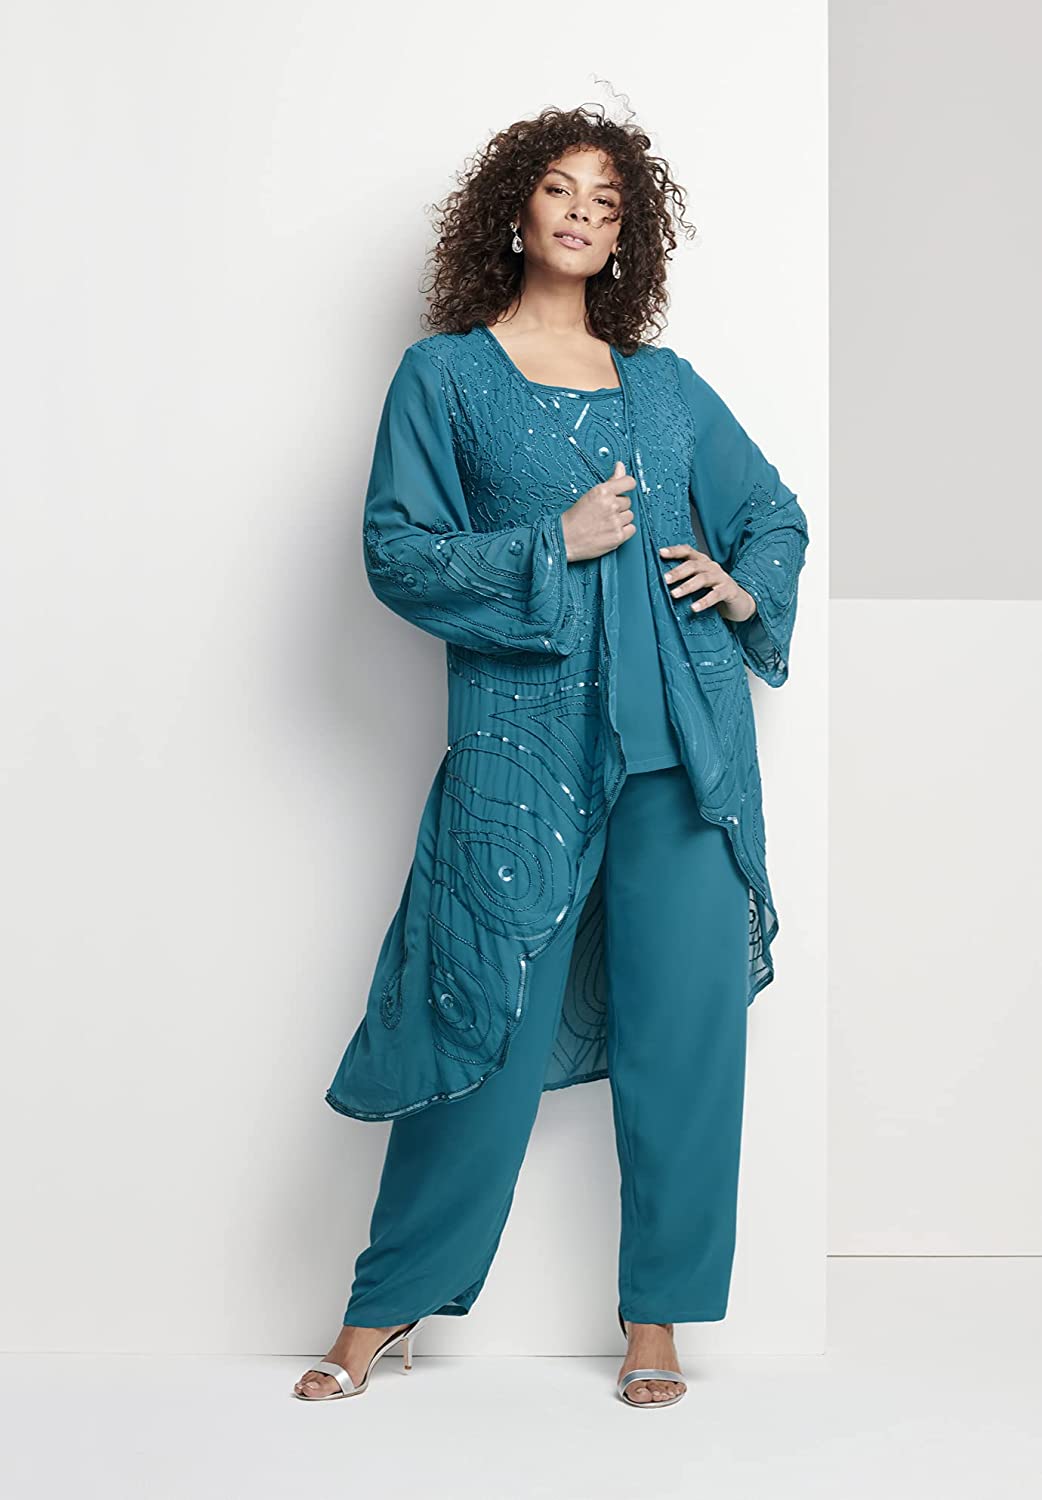 Roamans plus size beaded teal mother of the bride pants suit